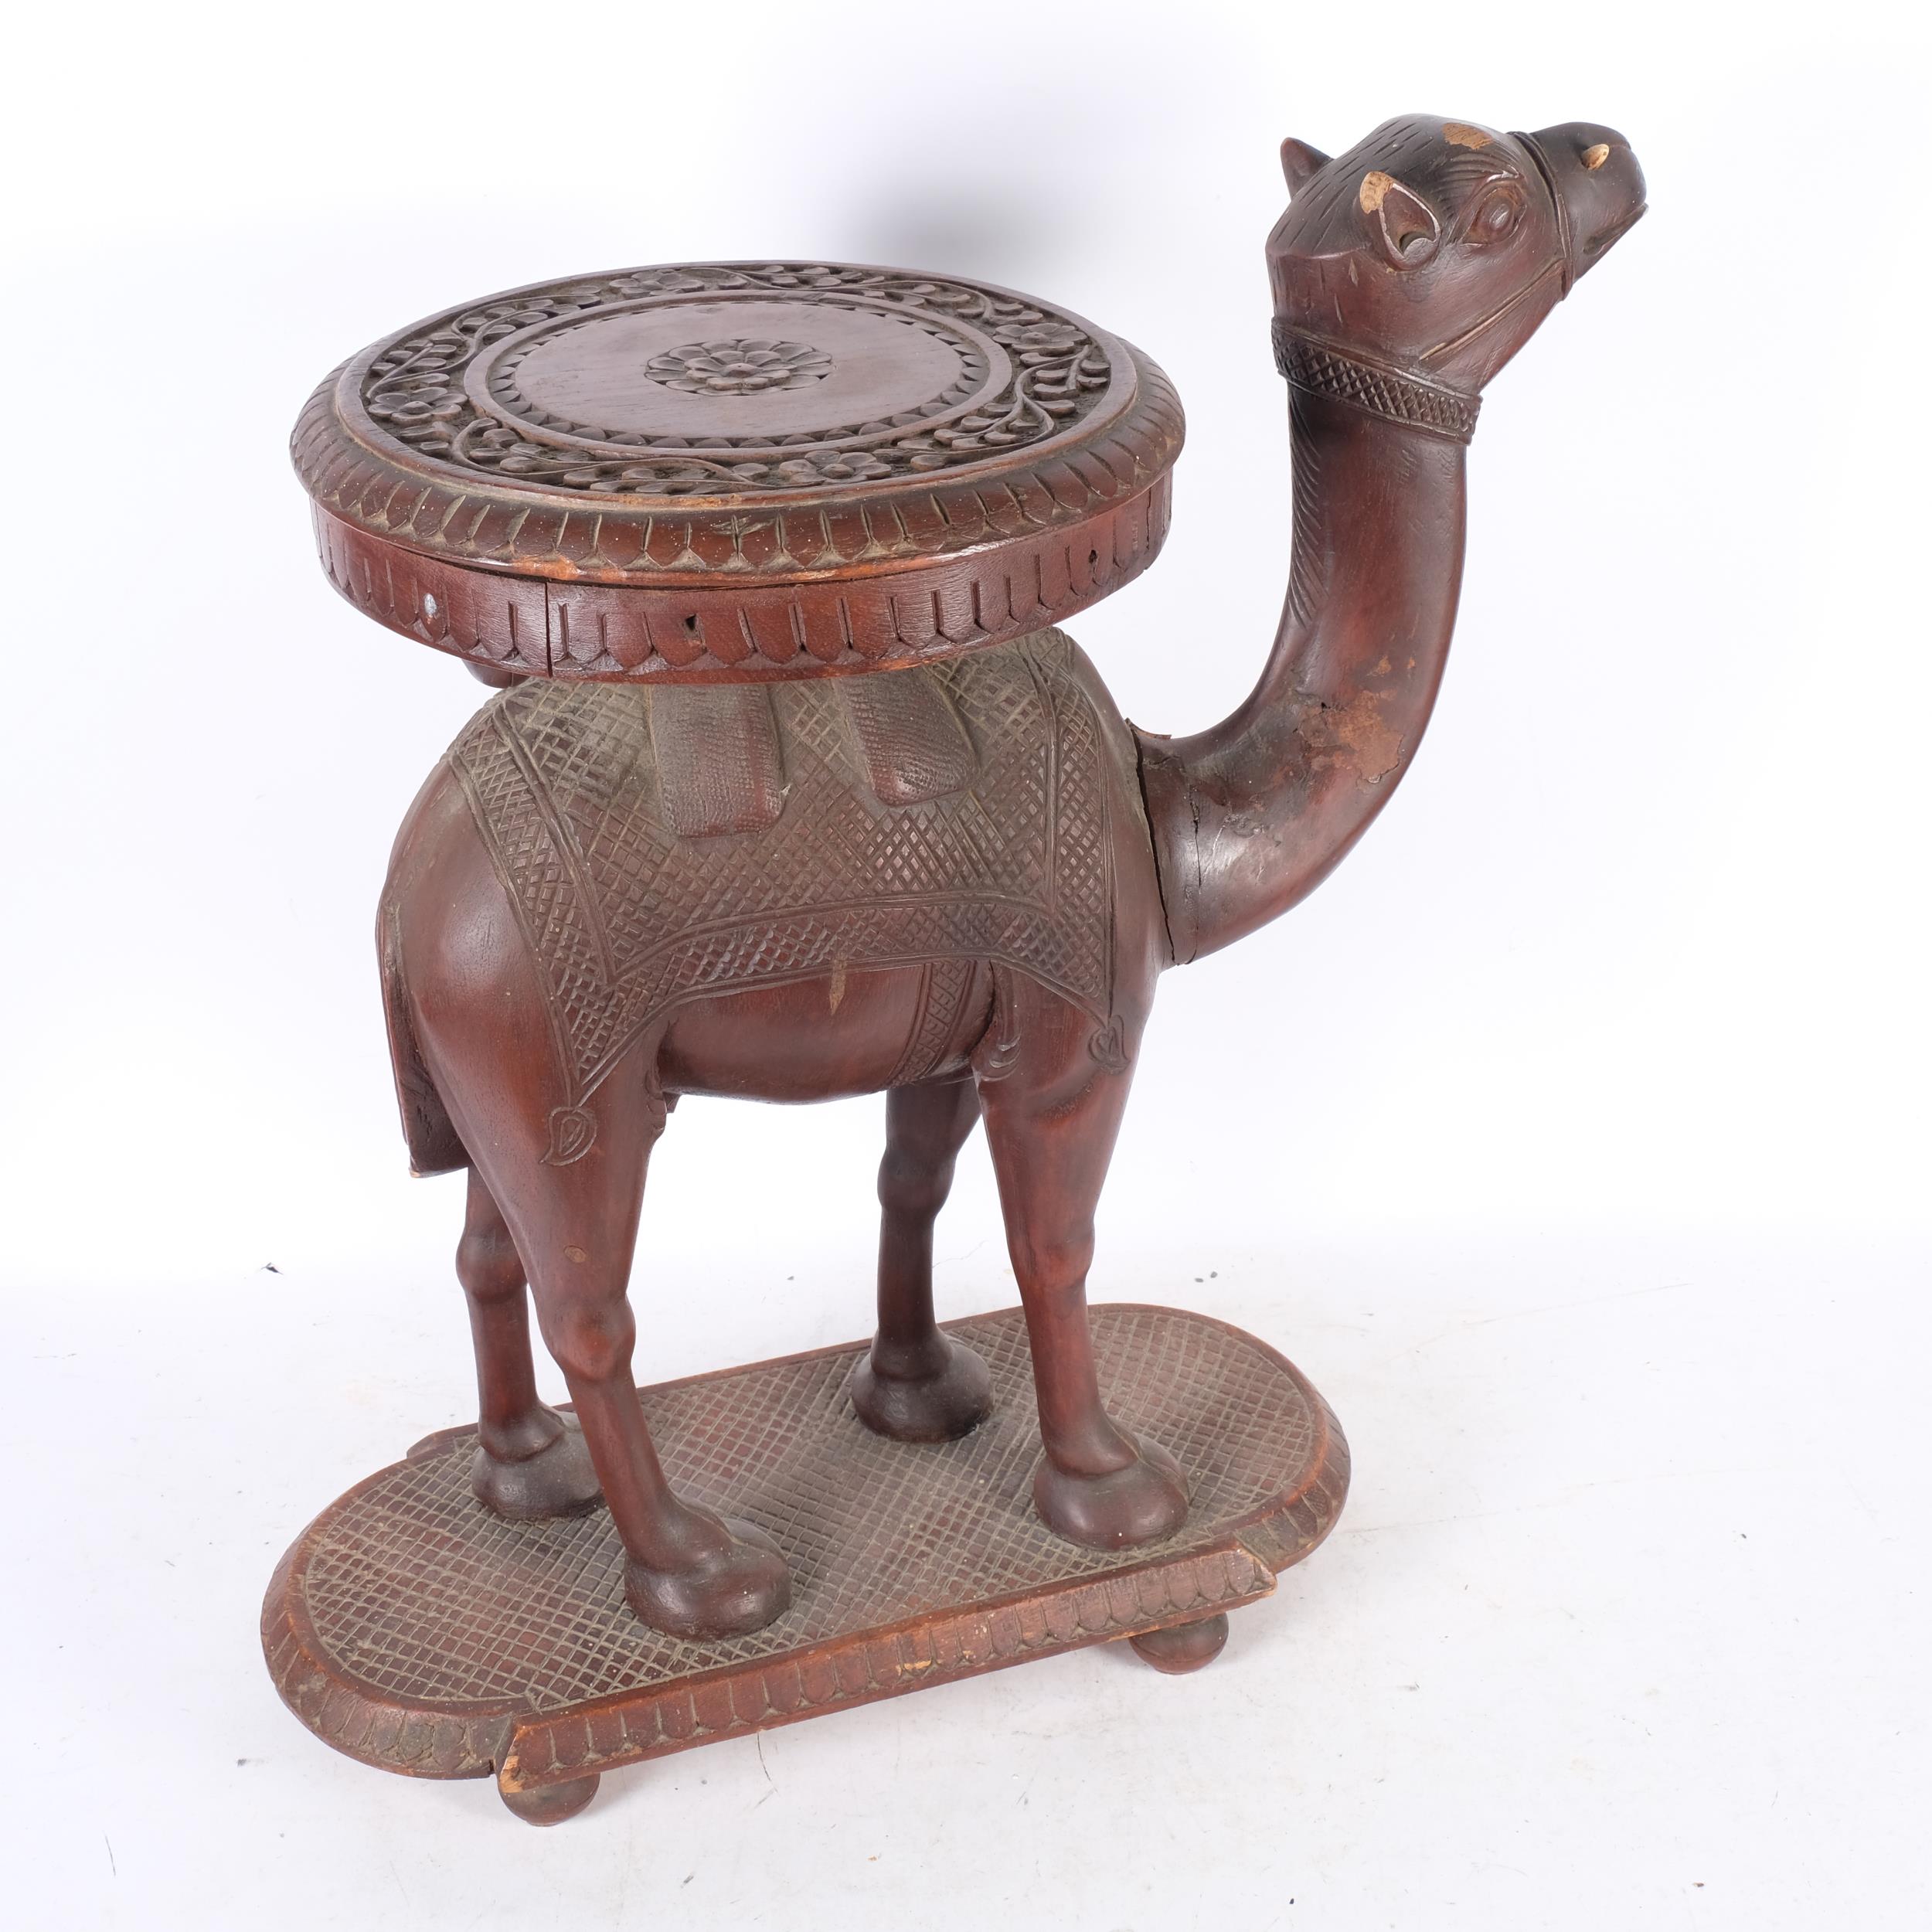 Unusual carved wood camel figure stand, resting on 4 feet, H59cm - Image 2 of 2